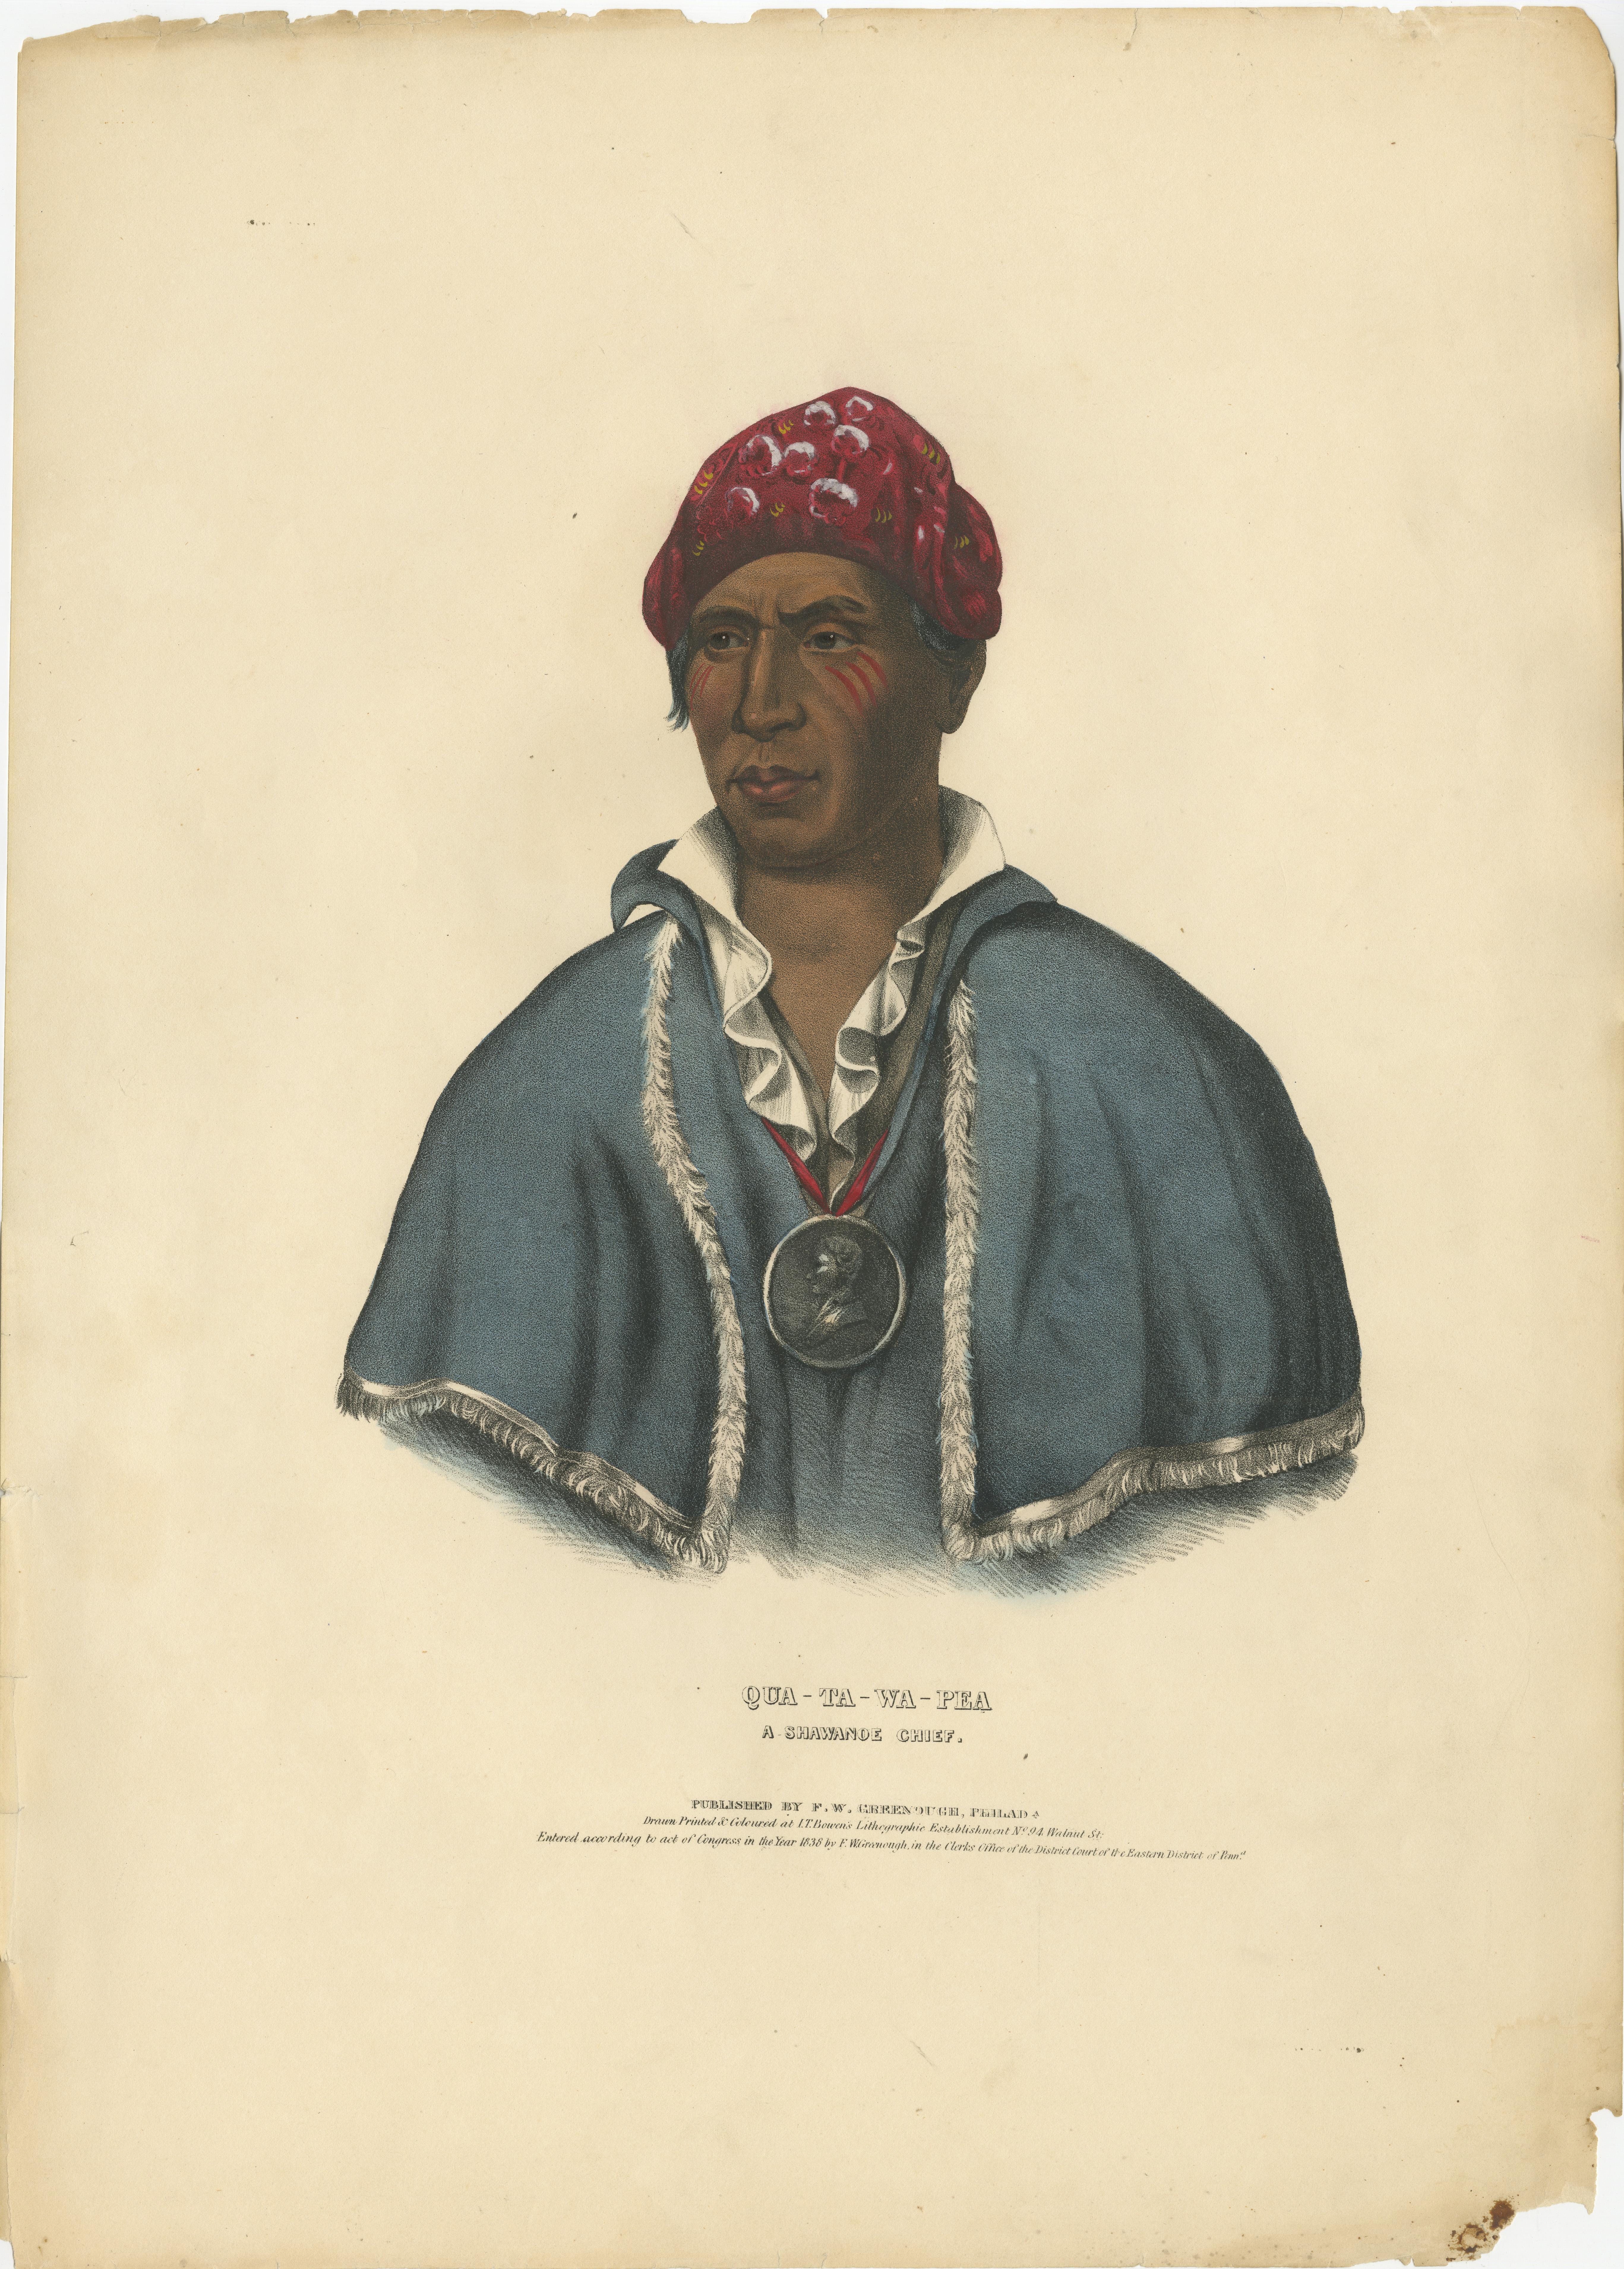 The Shawnee Sentinel: Qua-Ta-Wa-Pea, A Chief of Poise and Peace

A hand-colored lithograph of Qua-Ta-Wa-Pea, also known as Leatherlips, a respected leader of the Shawnee tribe. This print is also from the influential 